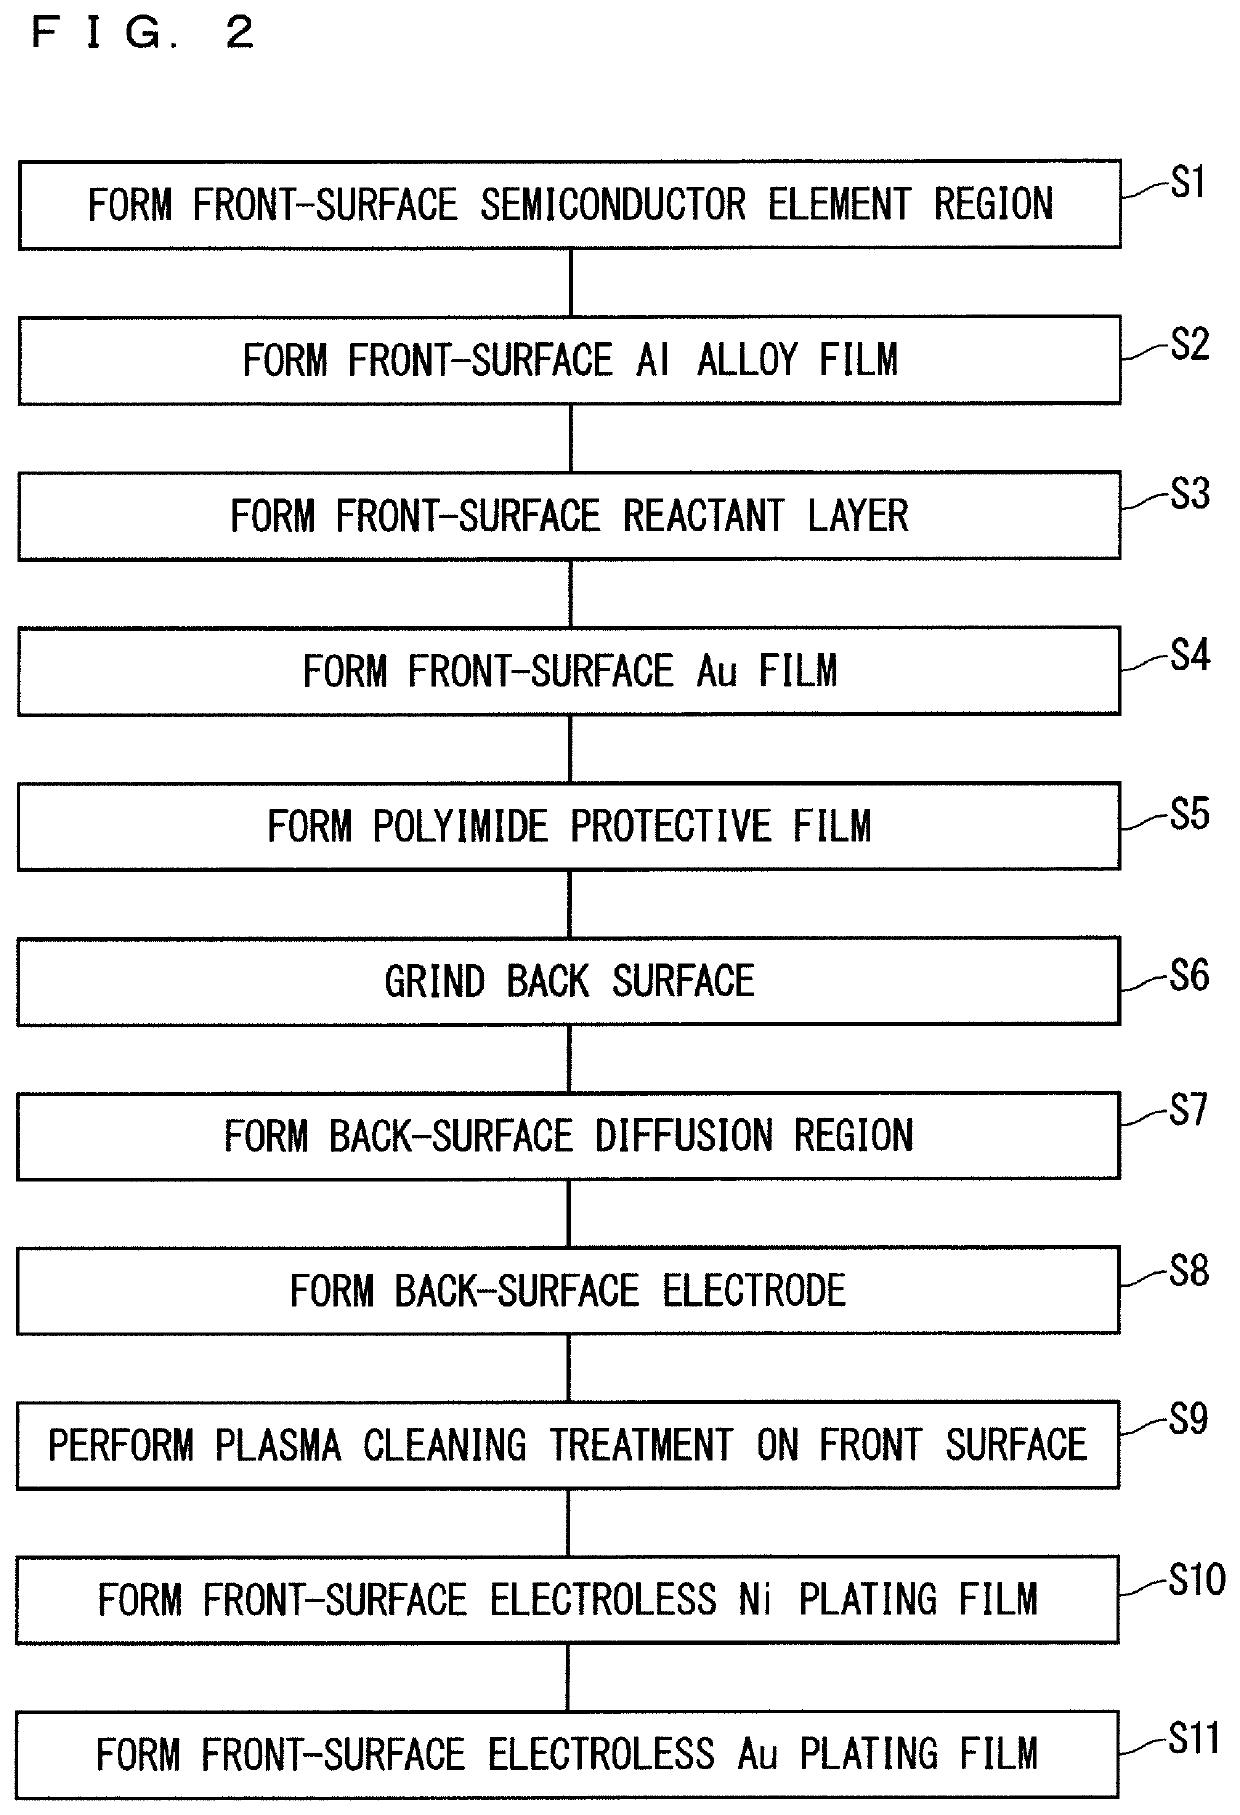 Semiconductor device including a reactant metal layer disposed between an aluminum alloy film and a catalyst metal film and method for manufacturing thereof